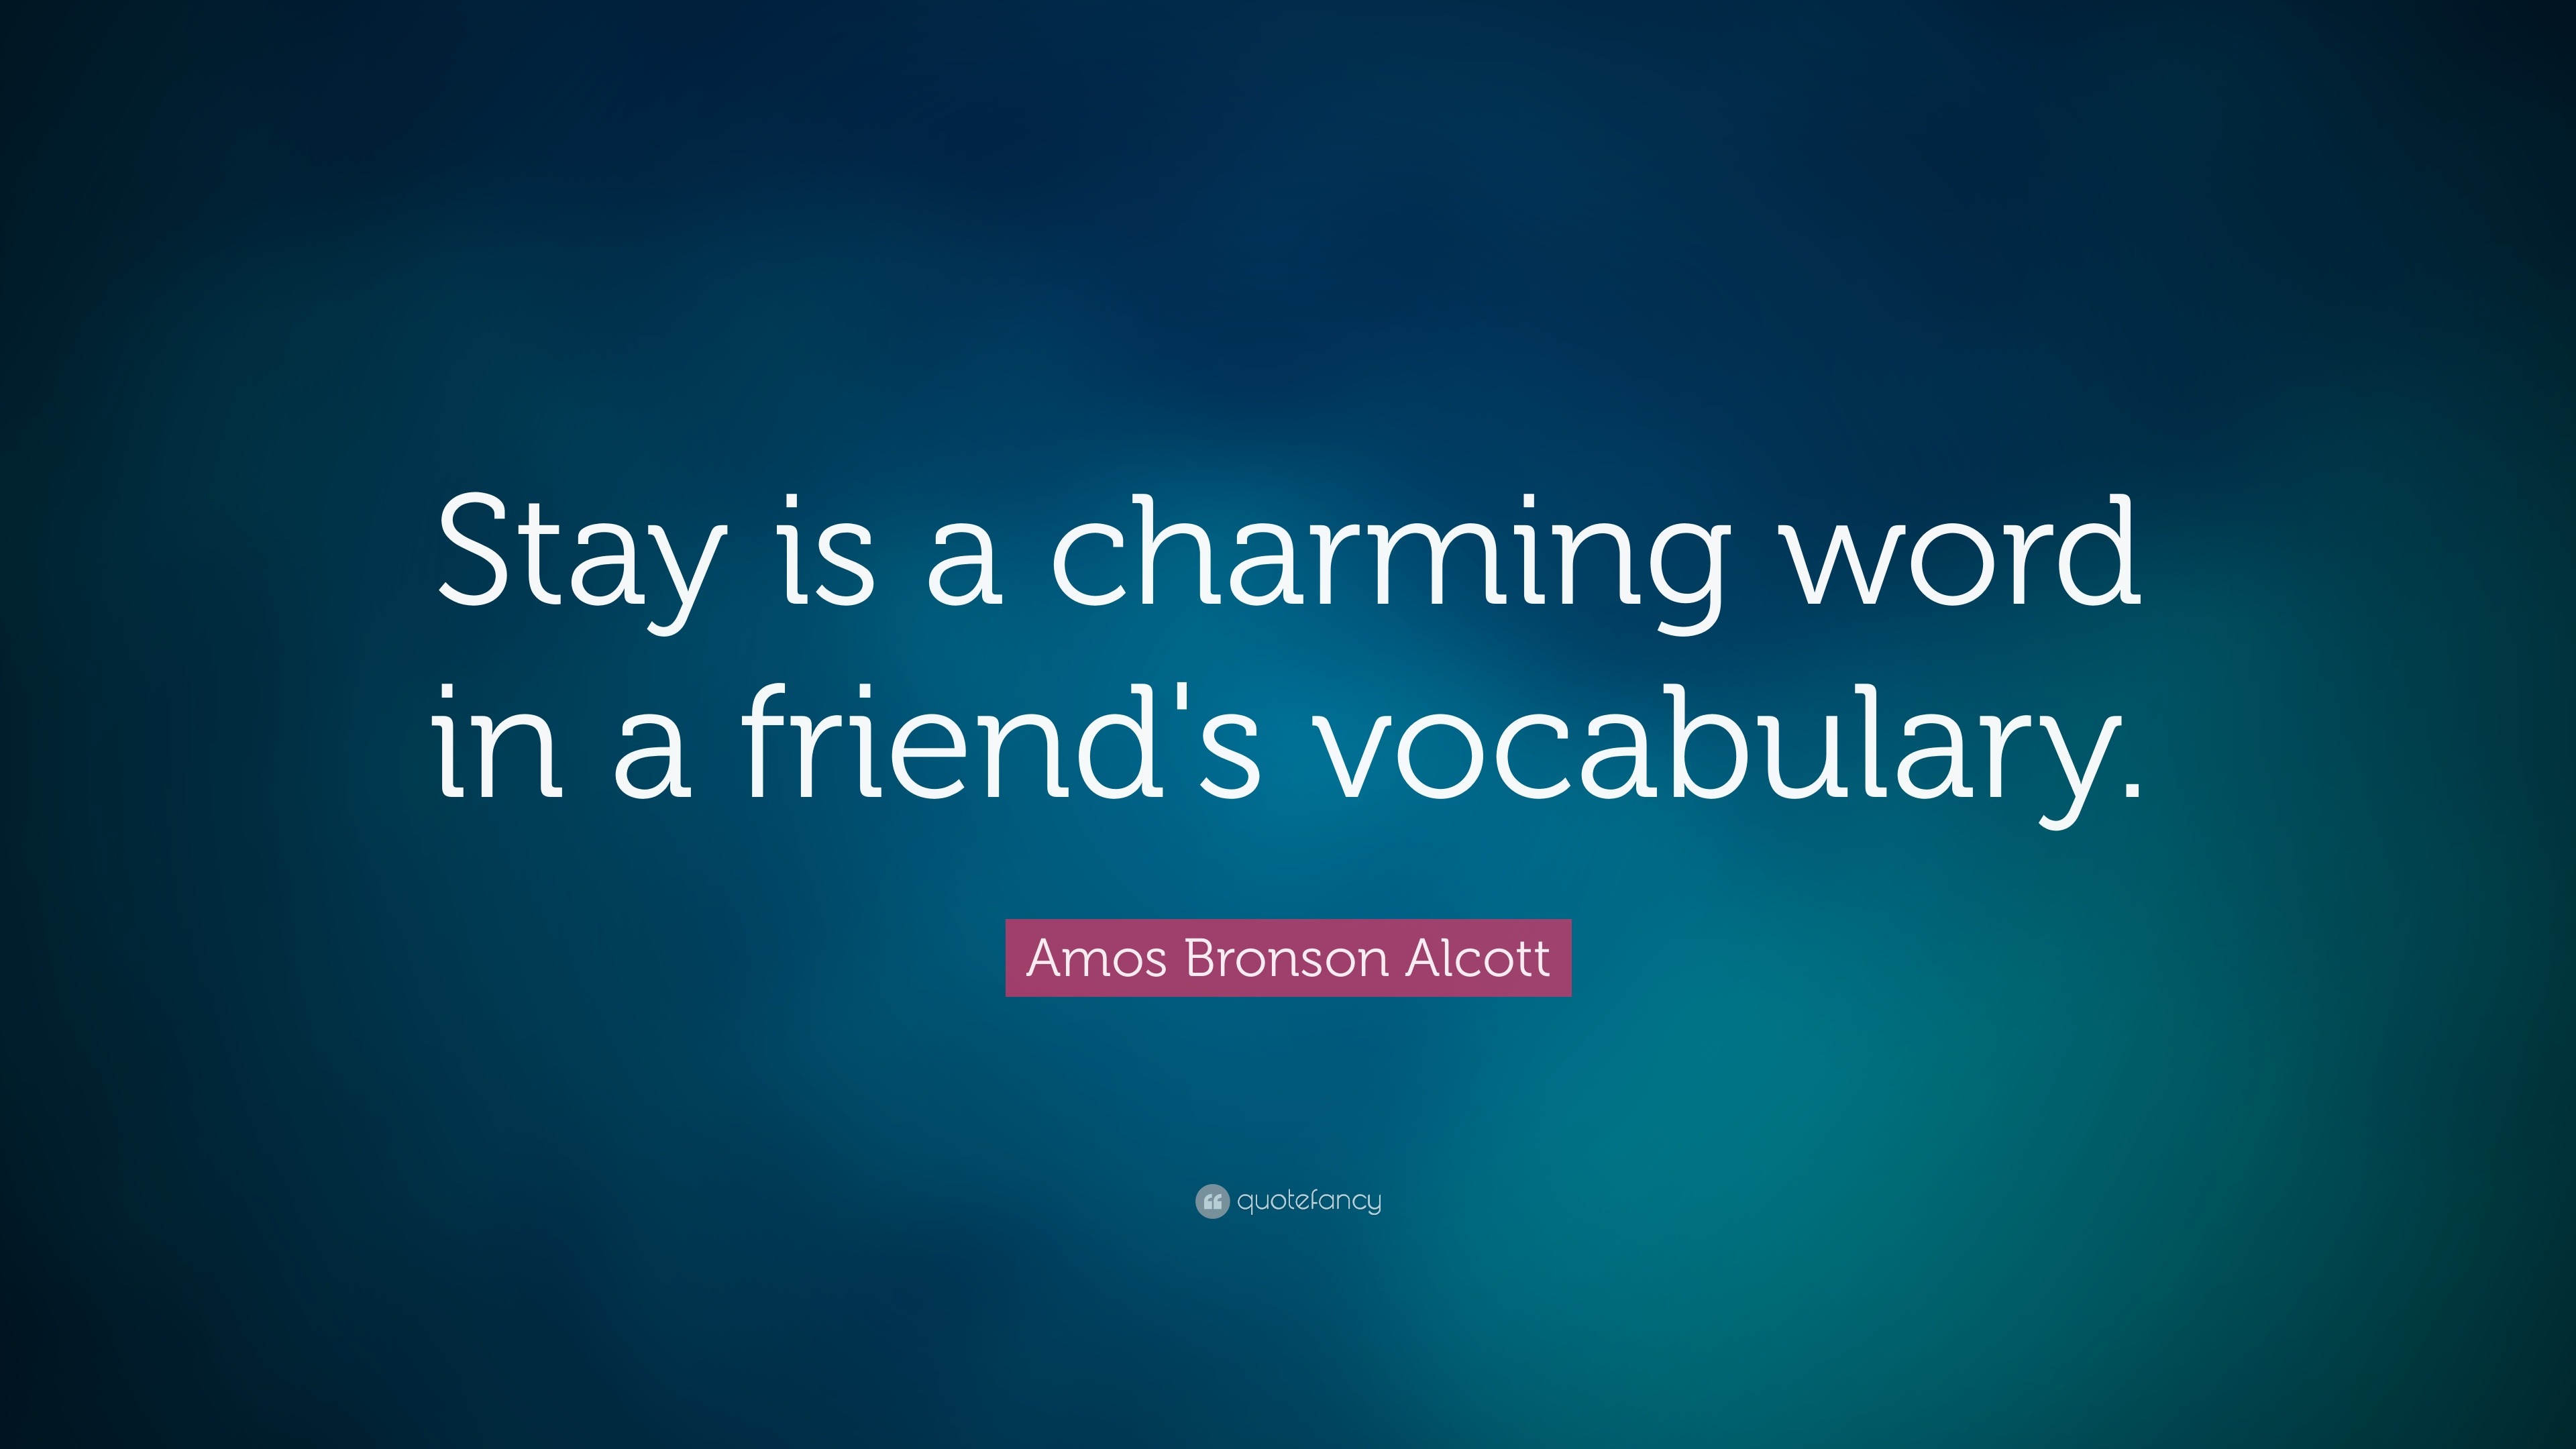 Friendship Quotes “Stay is a charming word in a friend s vocabulary ” —